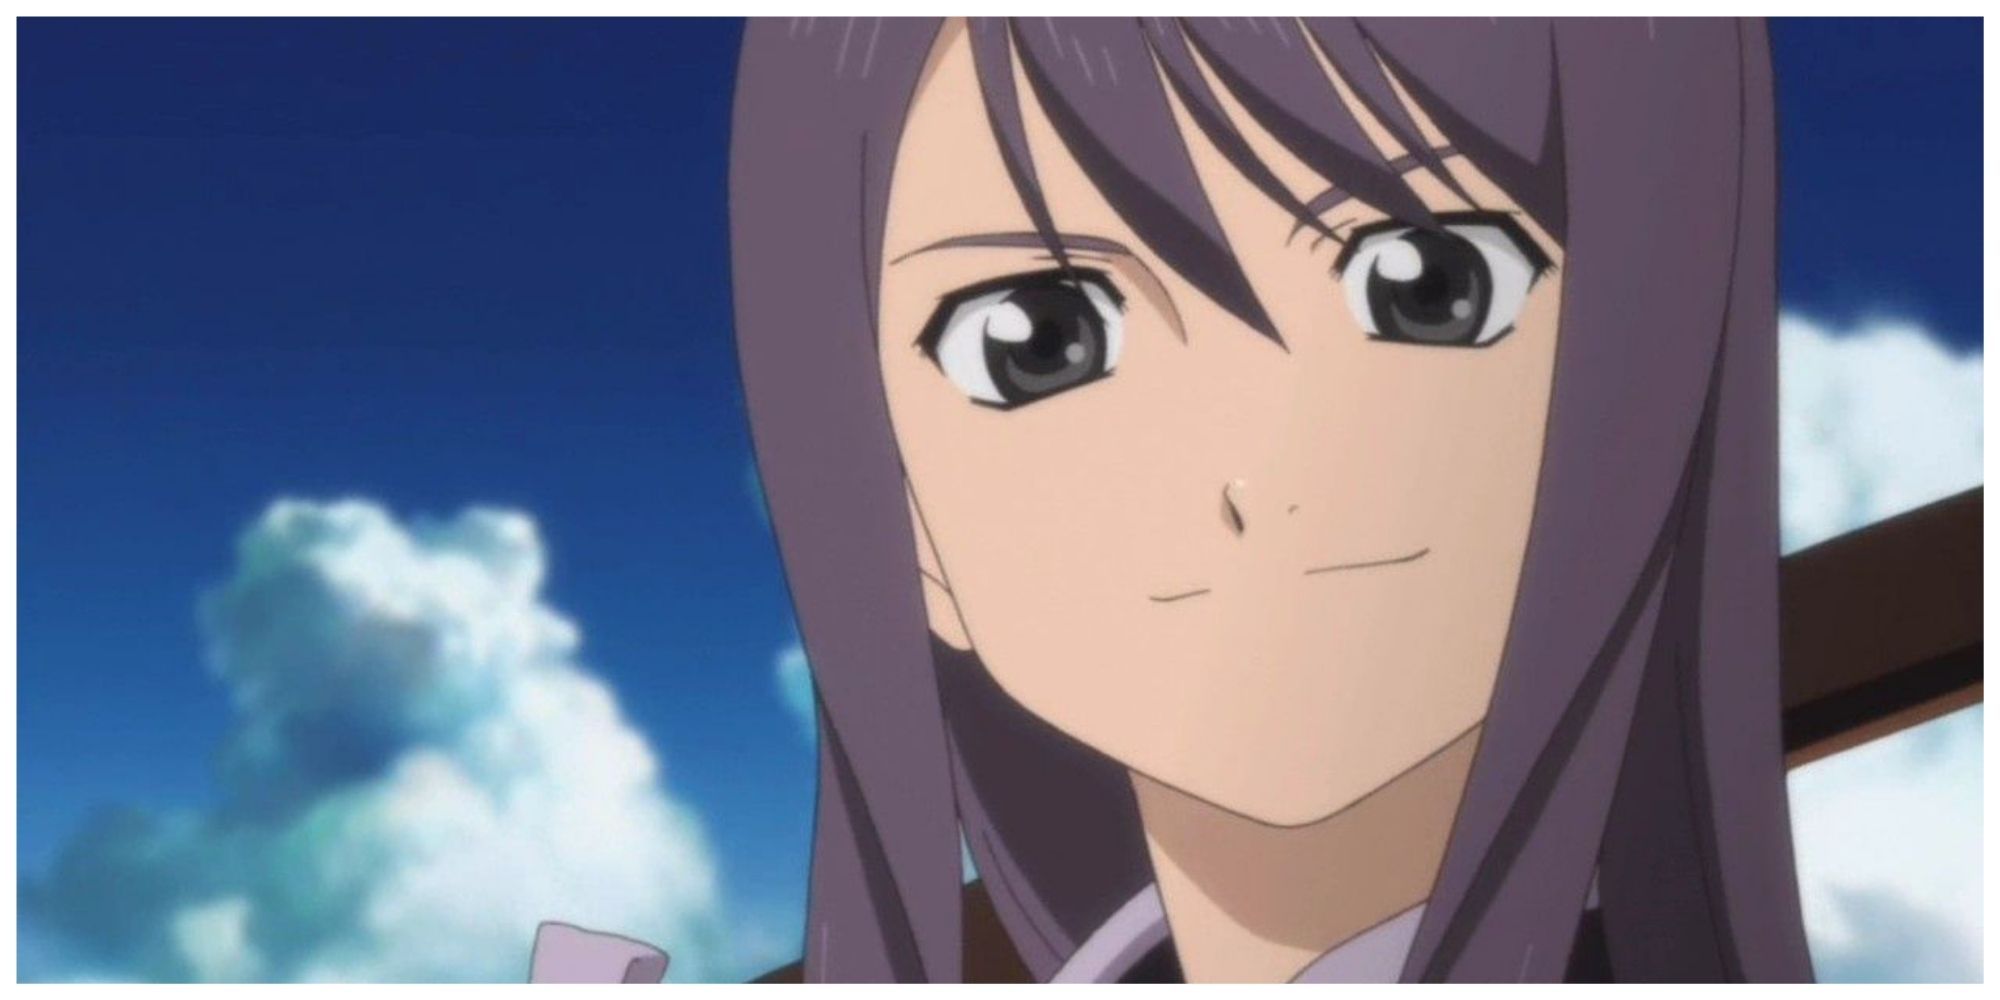 Yuri from Tales of Vesperia smiling with beautiful blue sky background